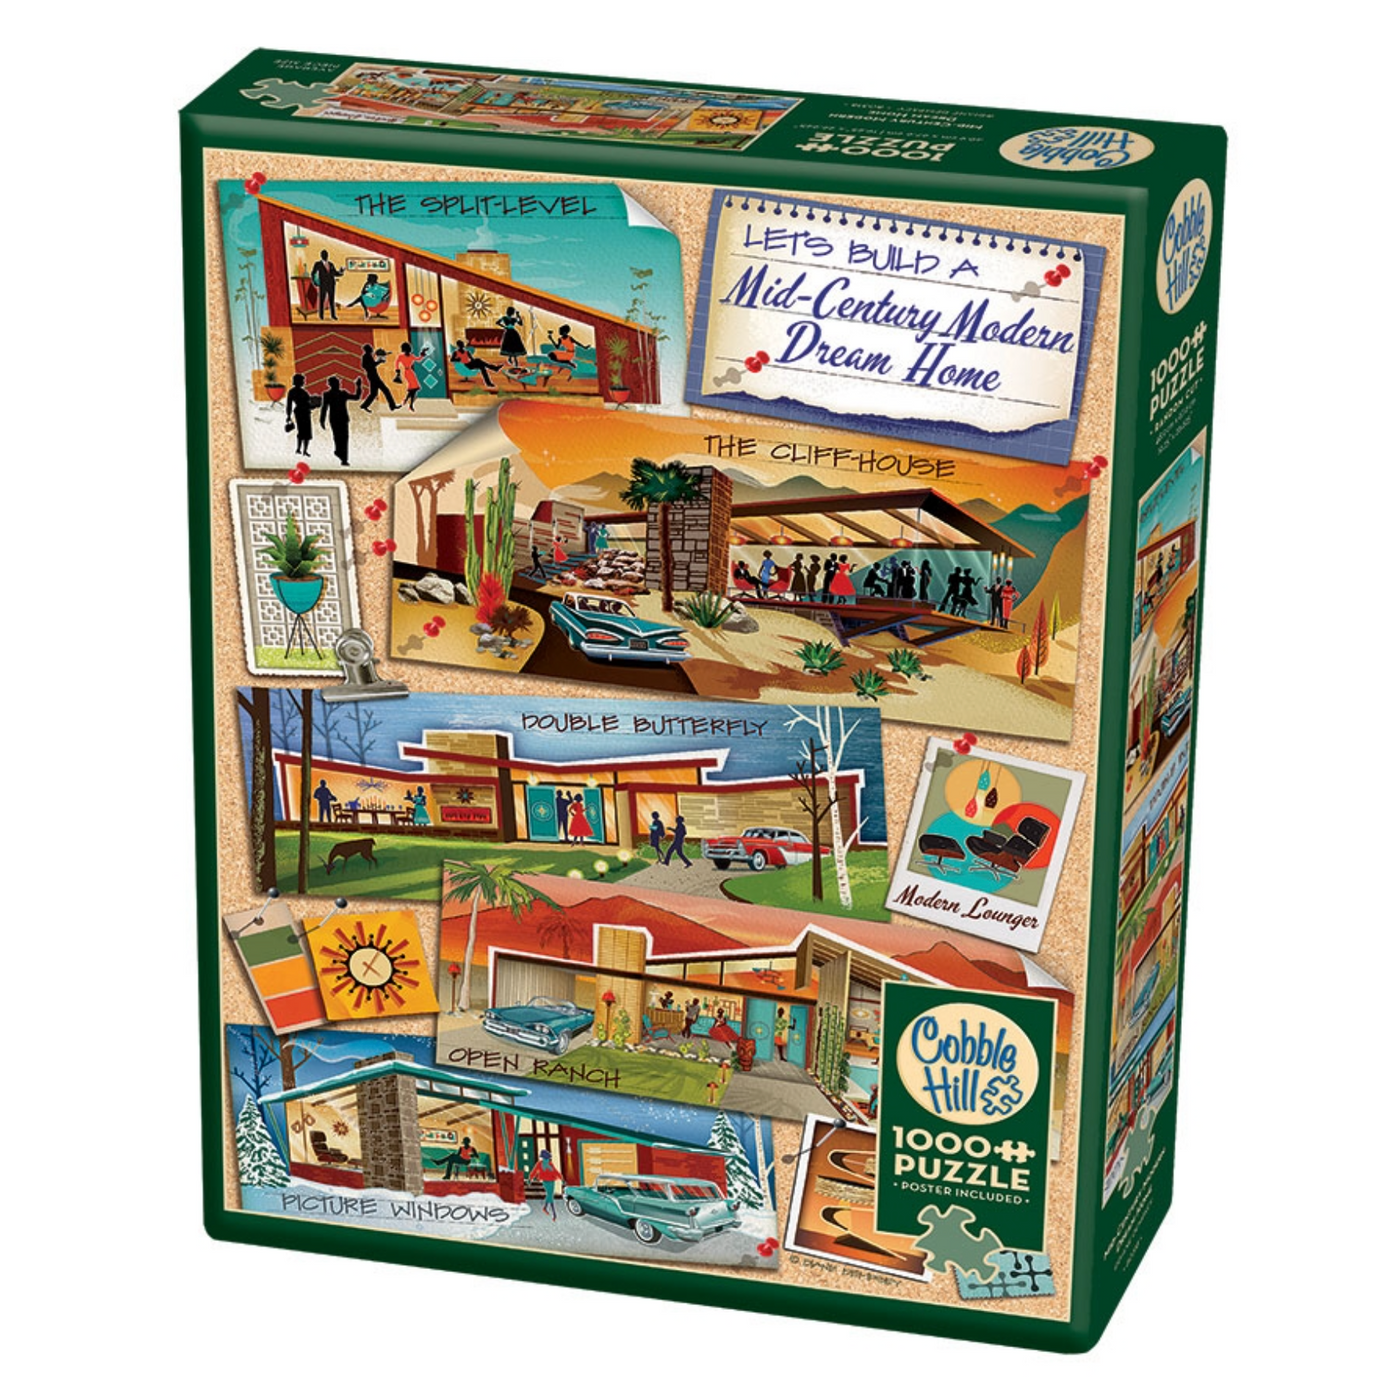 Mid-Century Modern Dream Home Jigsaw Puzzle - 1000 Pieces